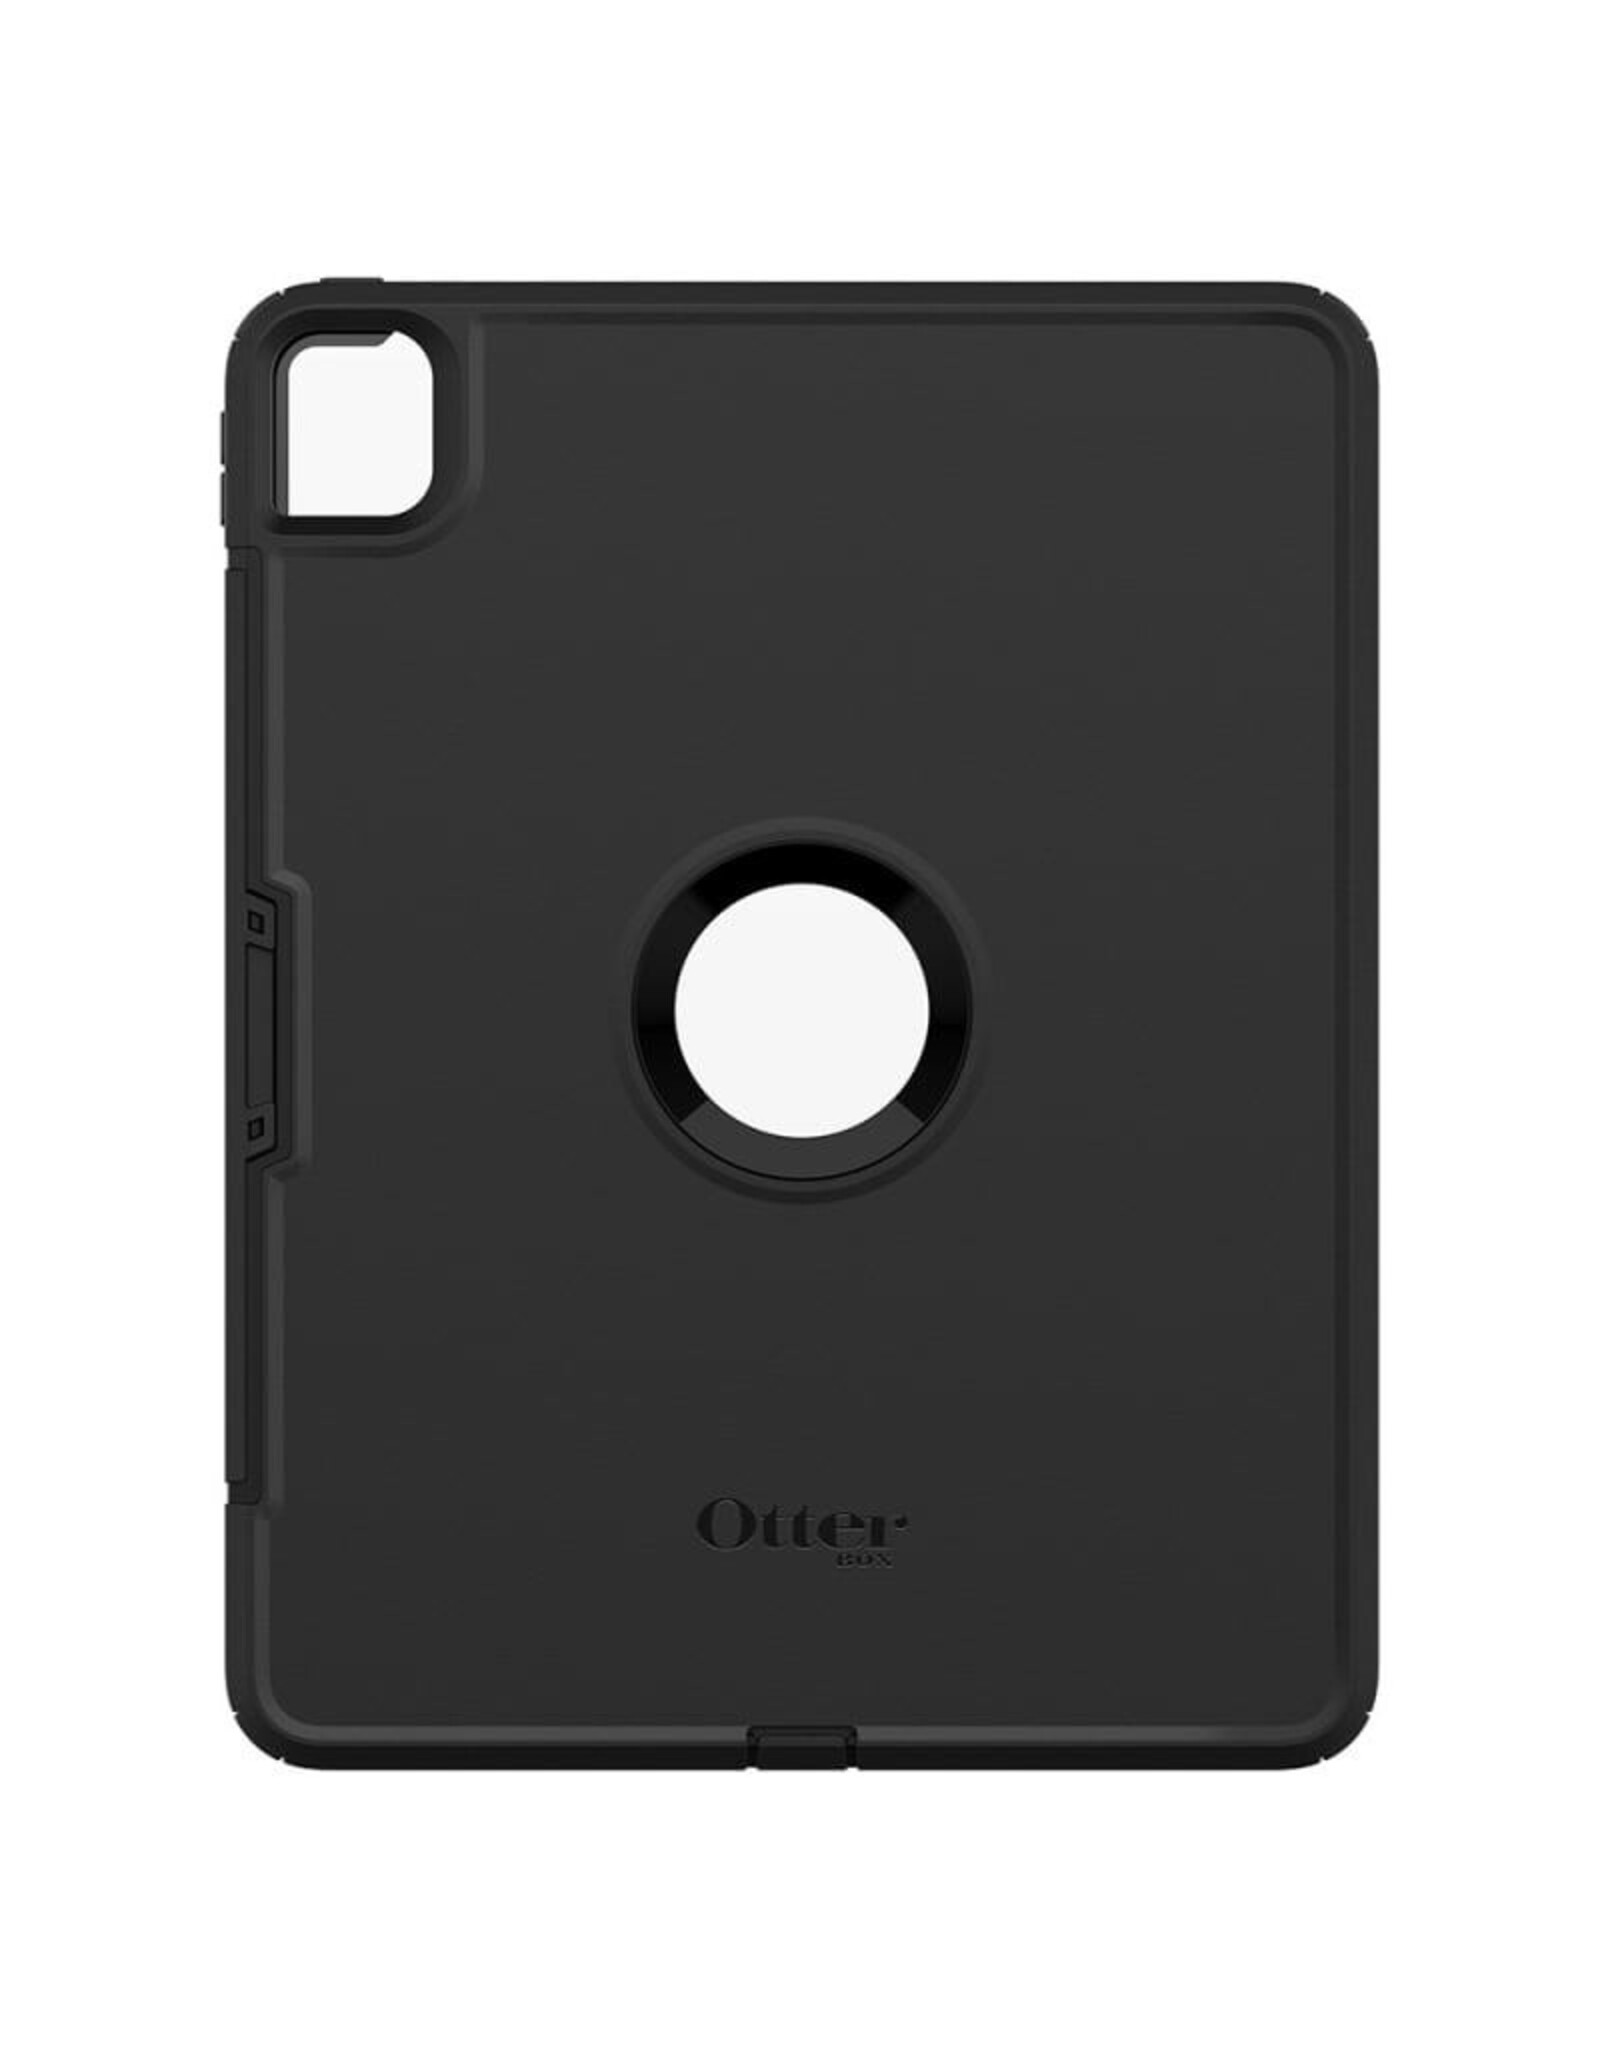 Otterbox OtterBox Defender Case For iPad Pro 12.9 (2018/2020))